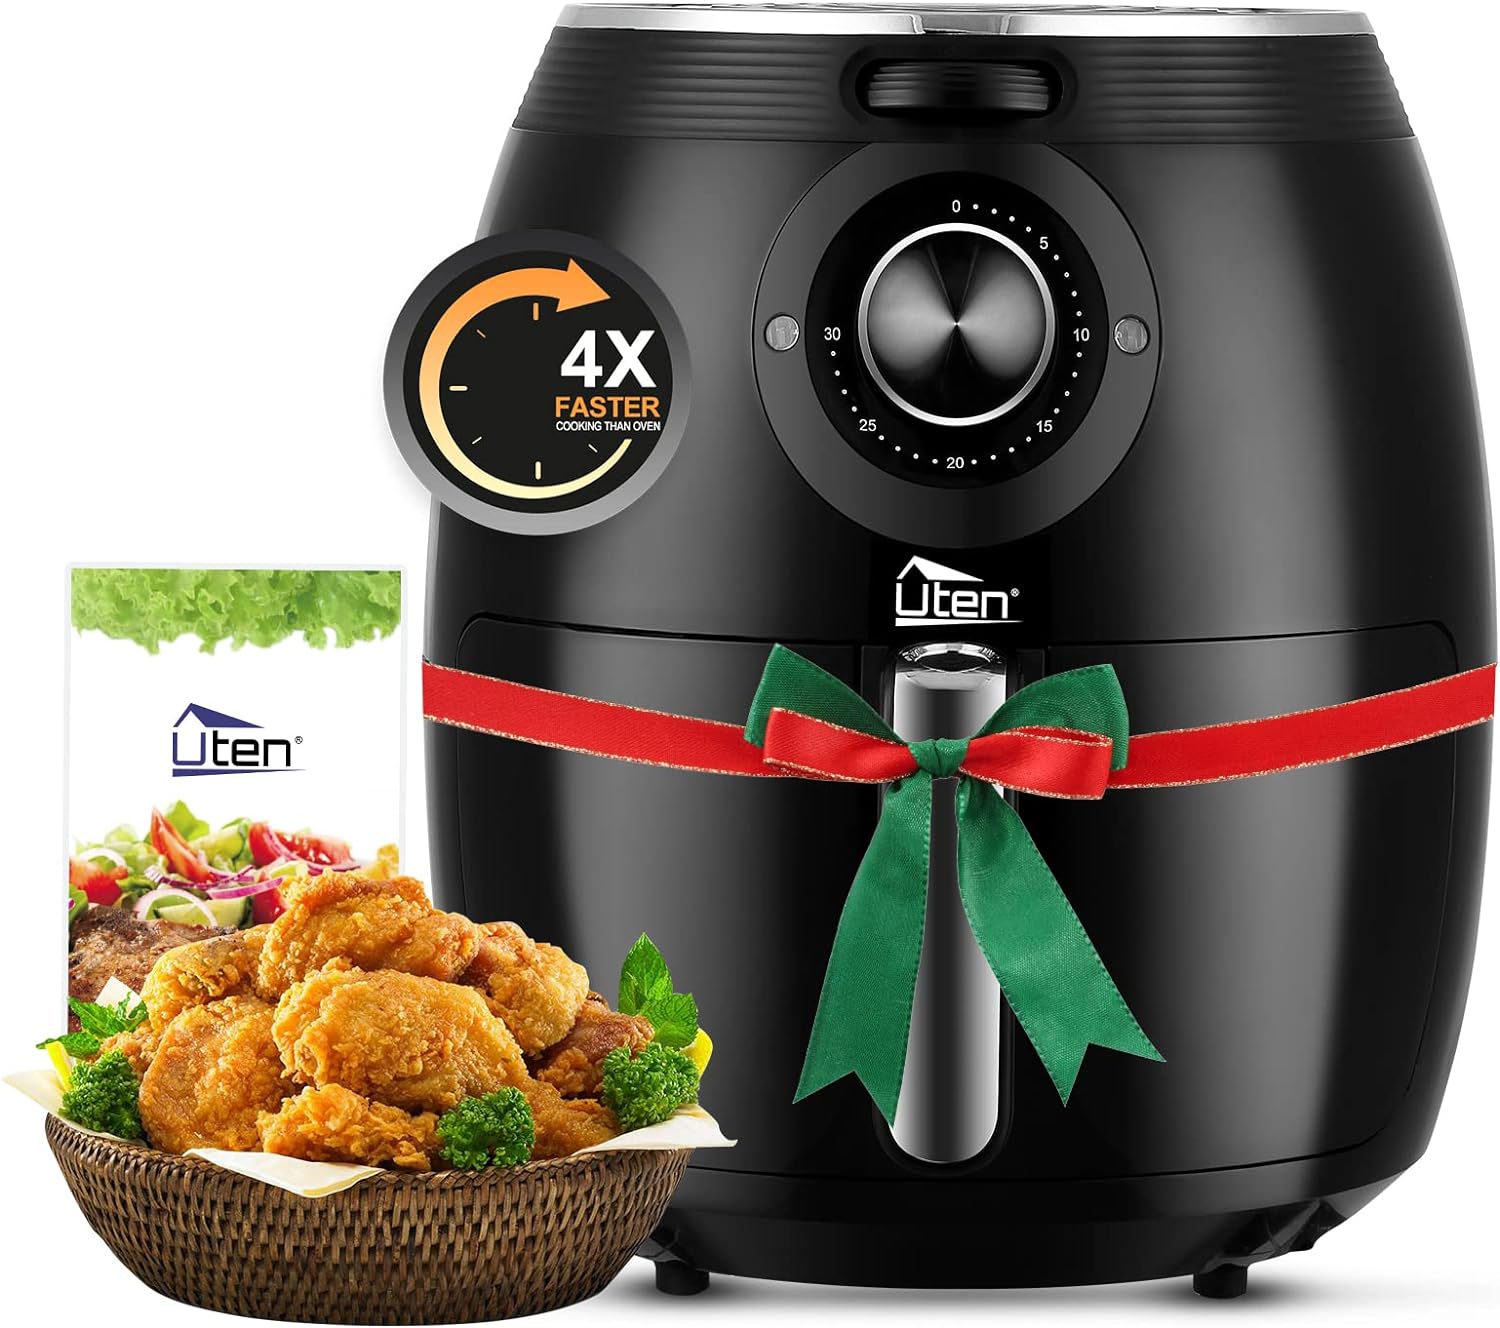 This air fryer is simple to use. Just put your food in, adjust the temperature and push the start button. That' all. My last air fryer was a touch screen with to many choices and it went off before you can do anything. This one gets the job done easily.